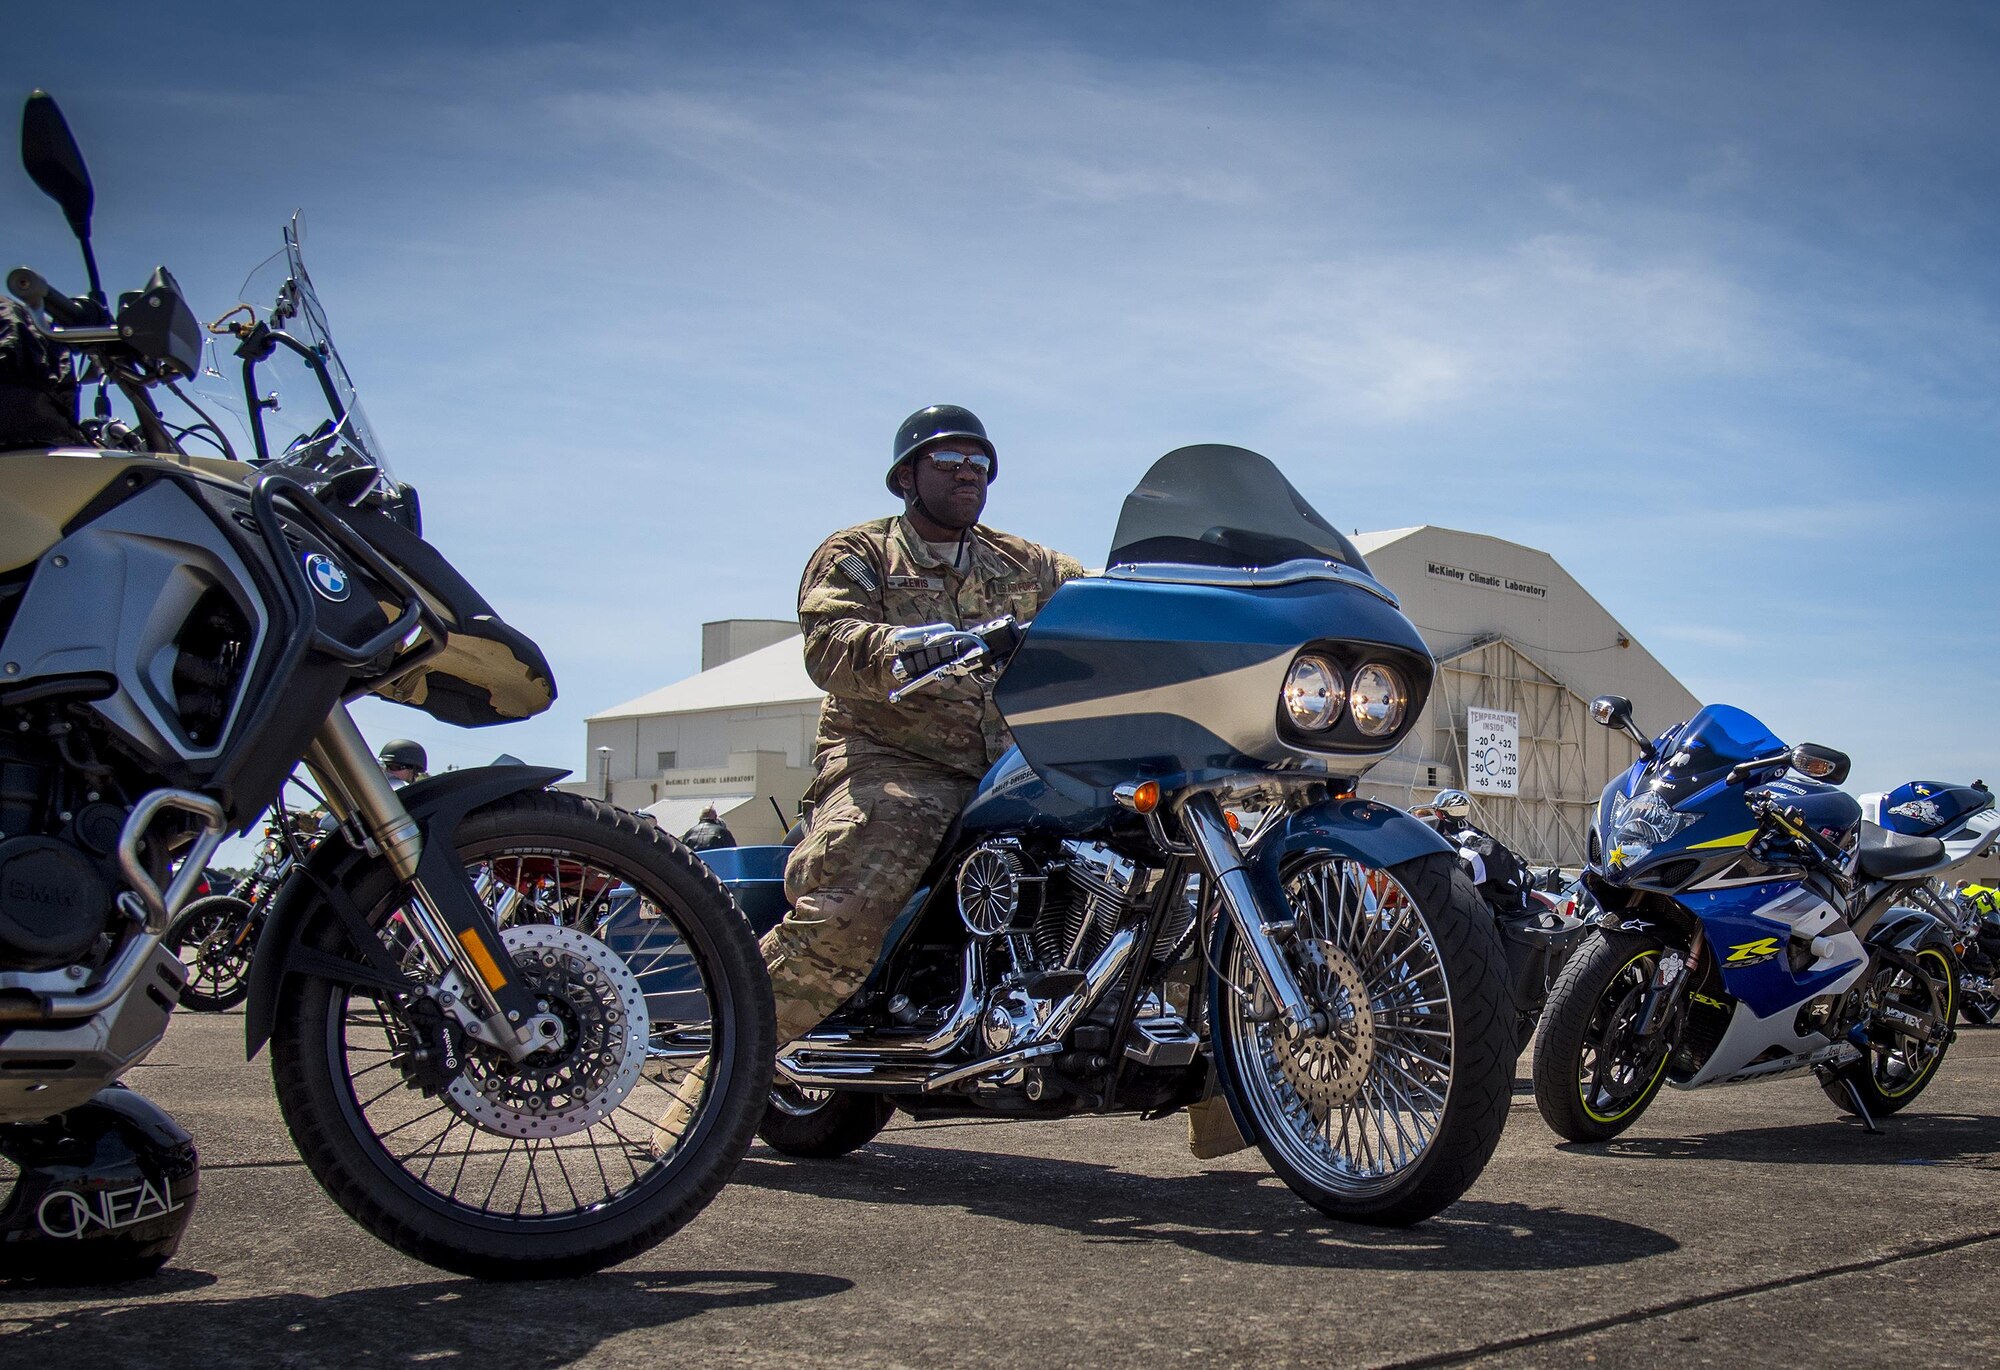 A biker rolls out after the annual motorcycle safety rally at Eglin Air Force Base, Fla., April 14.  More than 500 motorcyclists came out for the event that meets the annual safety briefing requirement for base riders.  (U.S. Air Force photo/Samuel King Jr.)